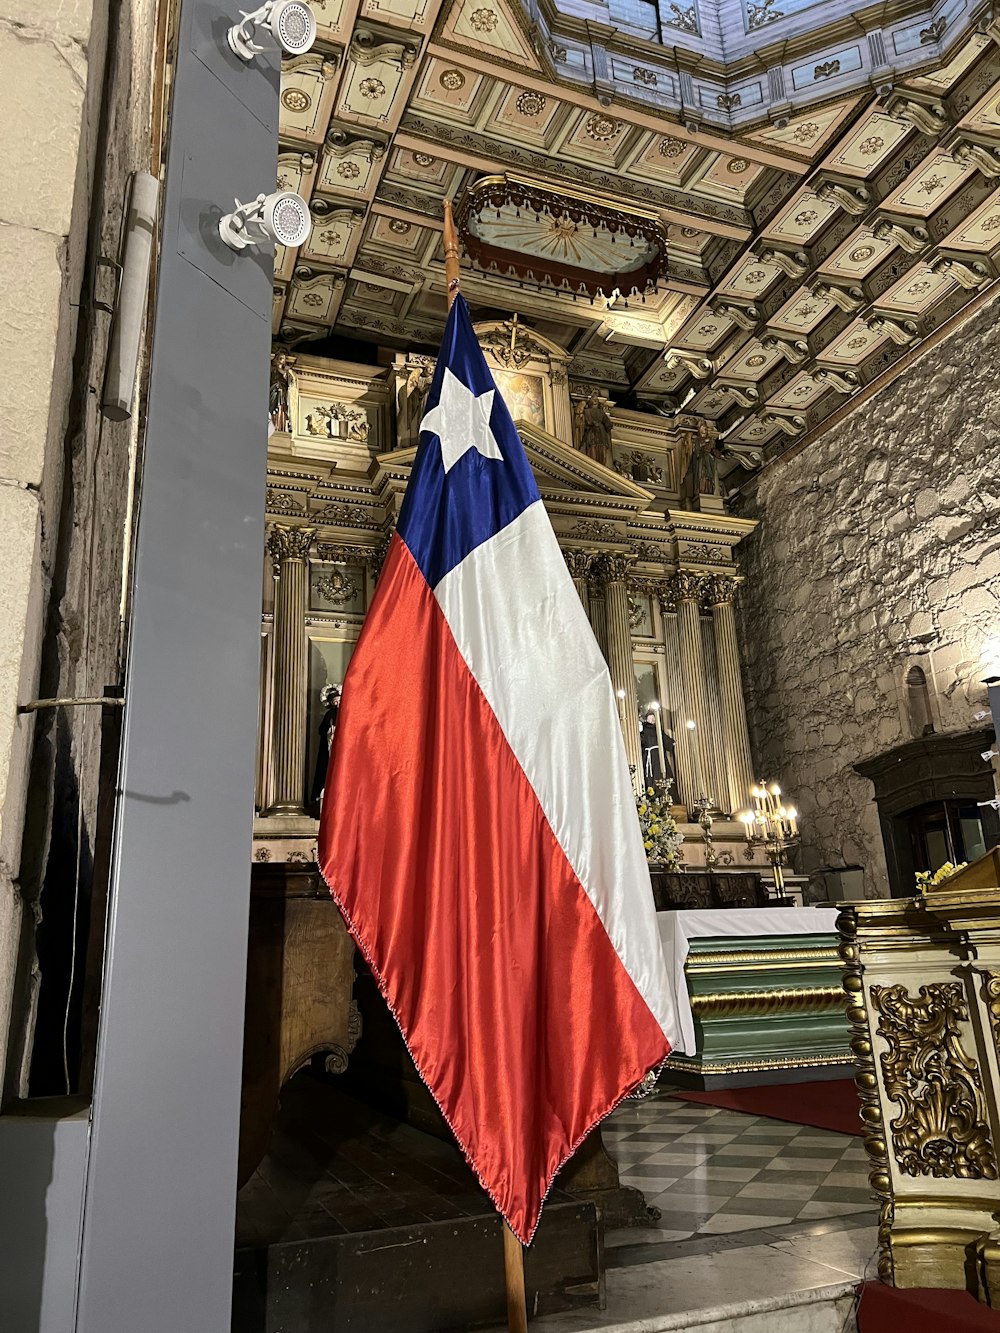 a flag hanging from the ceiling of a building